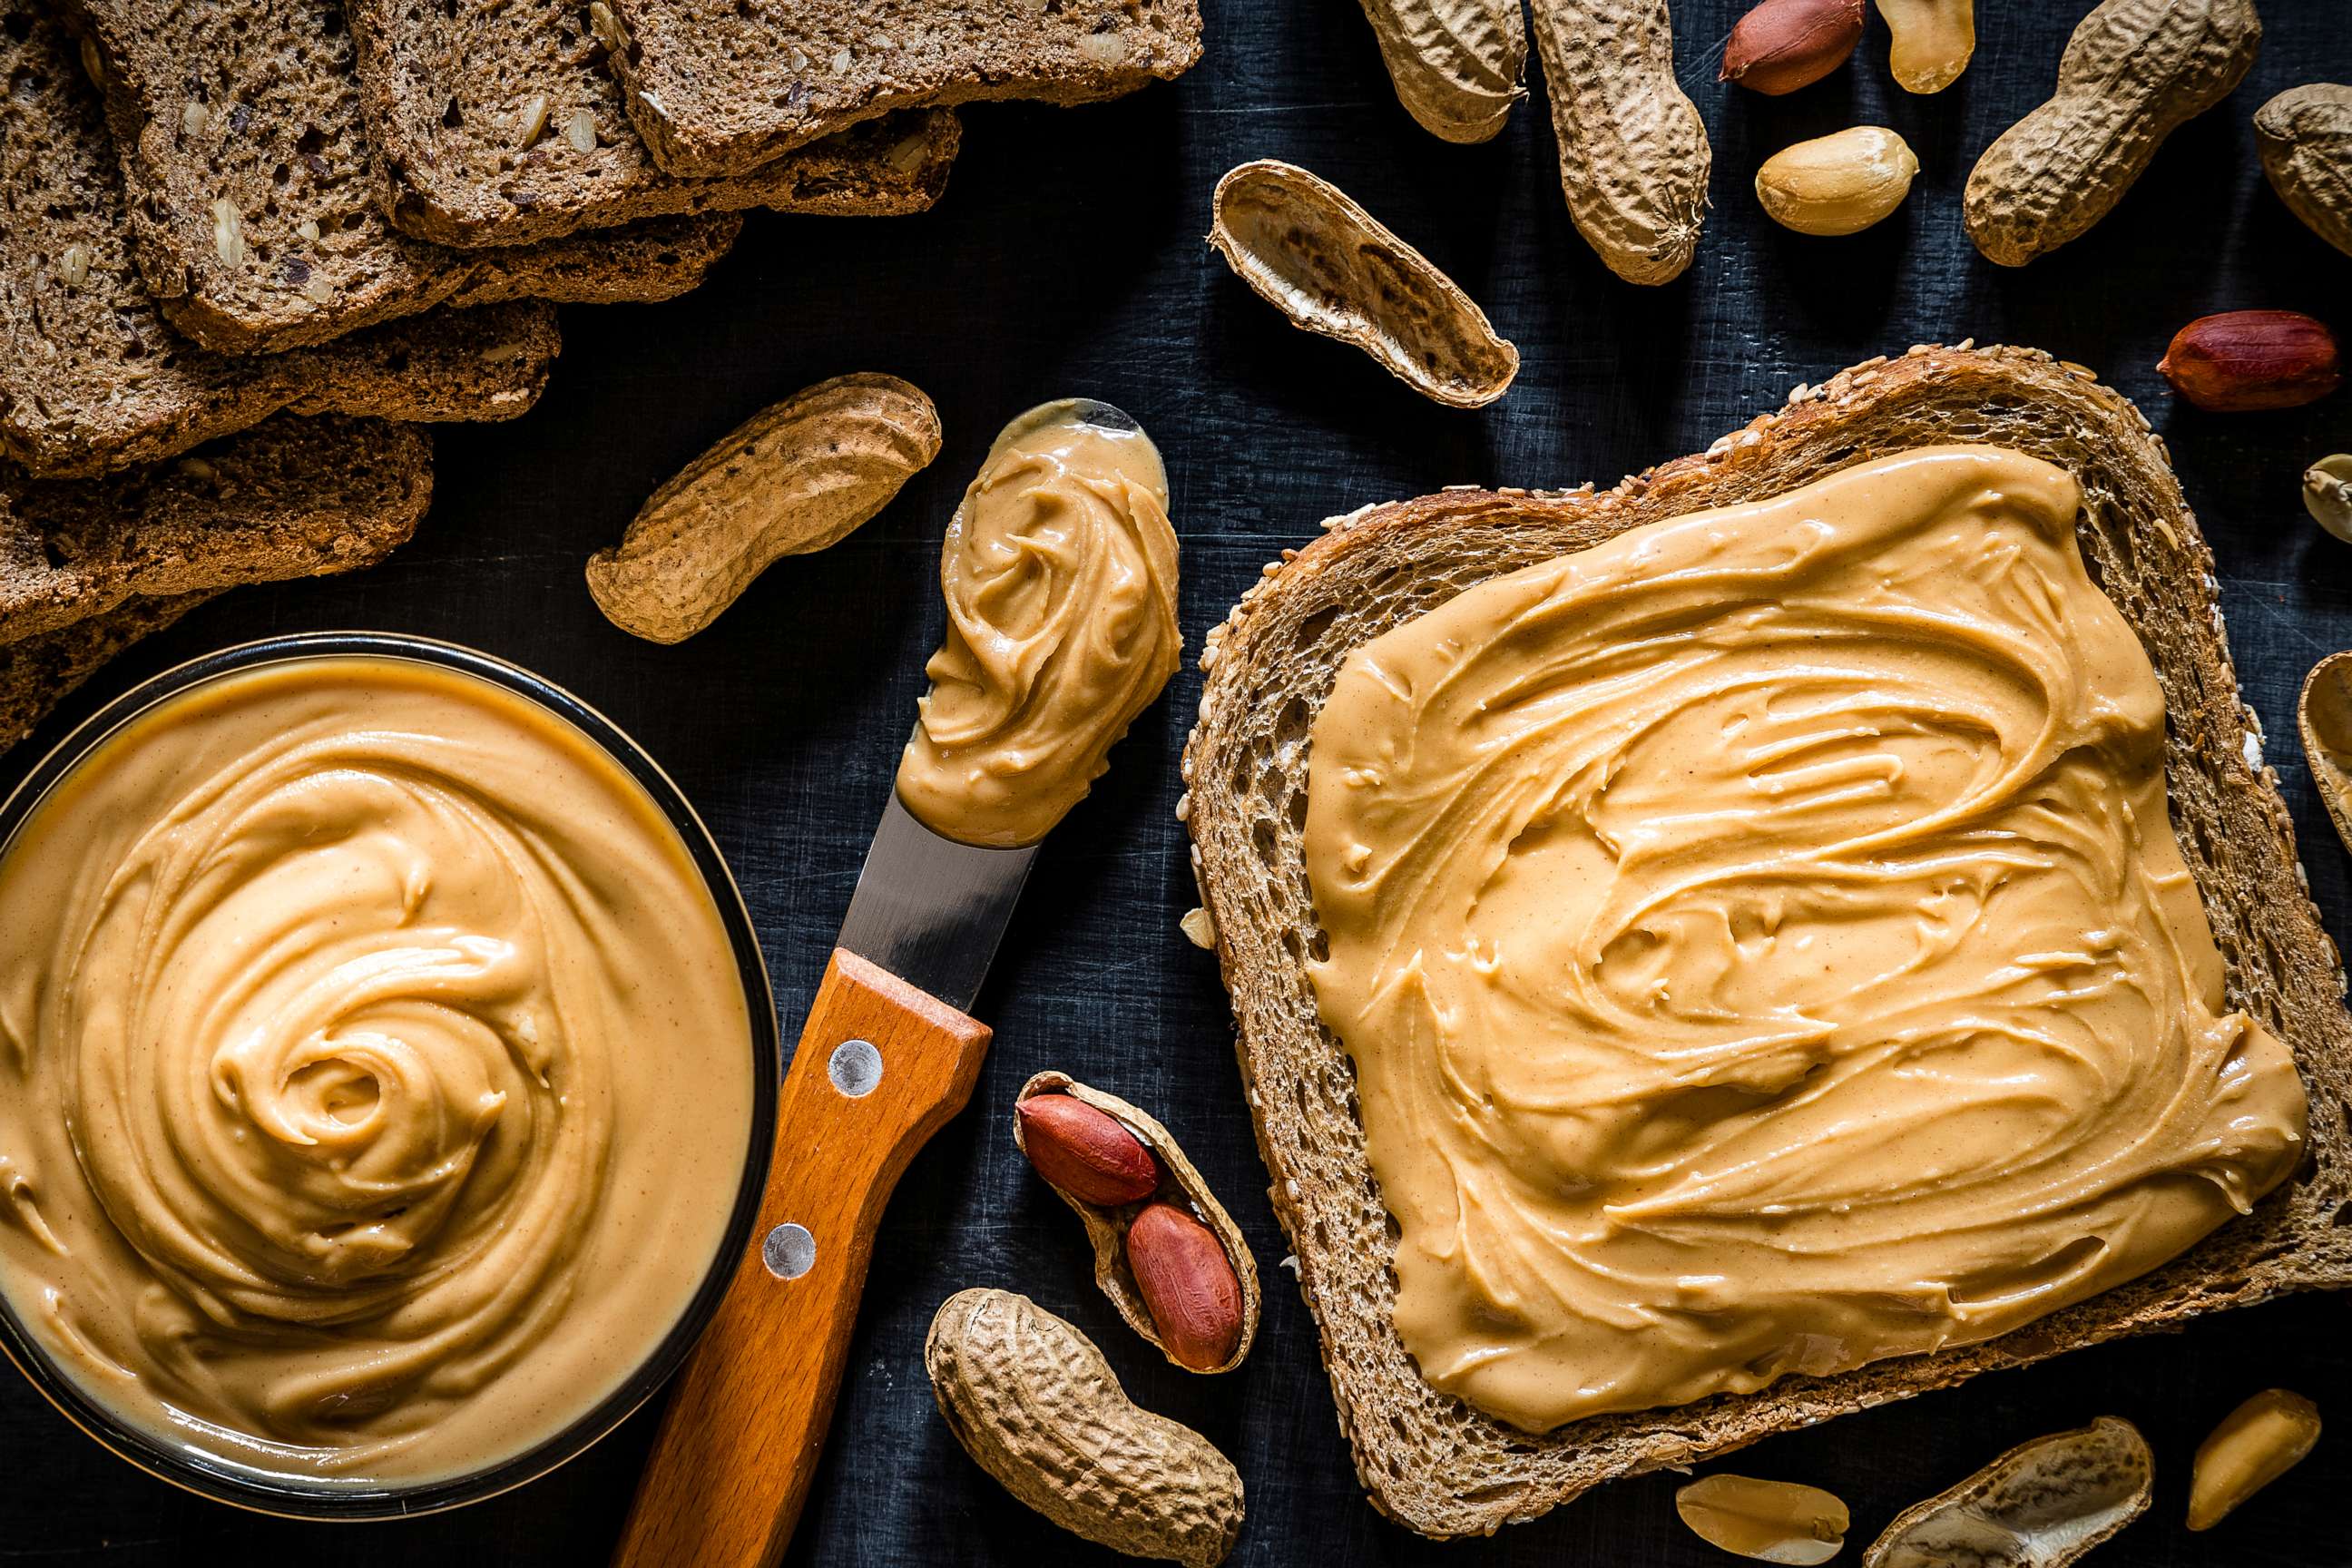 PHOTO: Peanut butter and peanuts are seen in this stock photo.